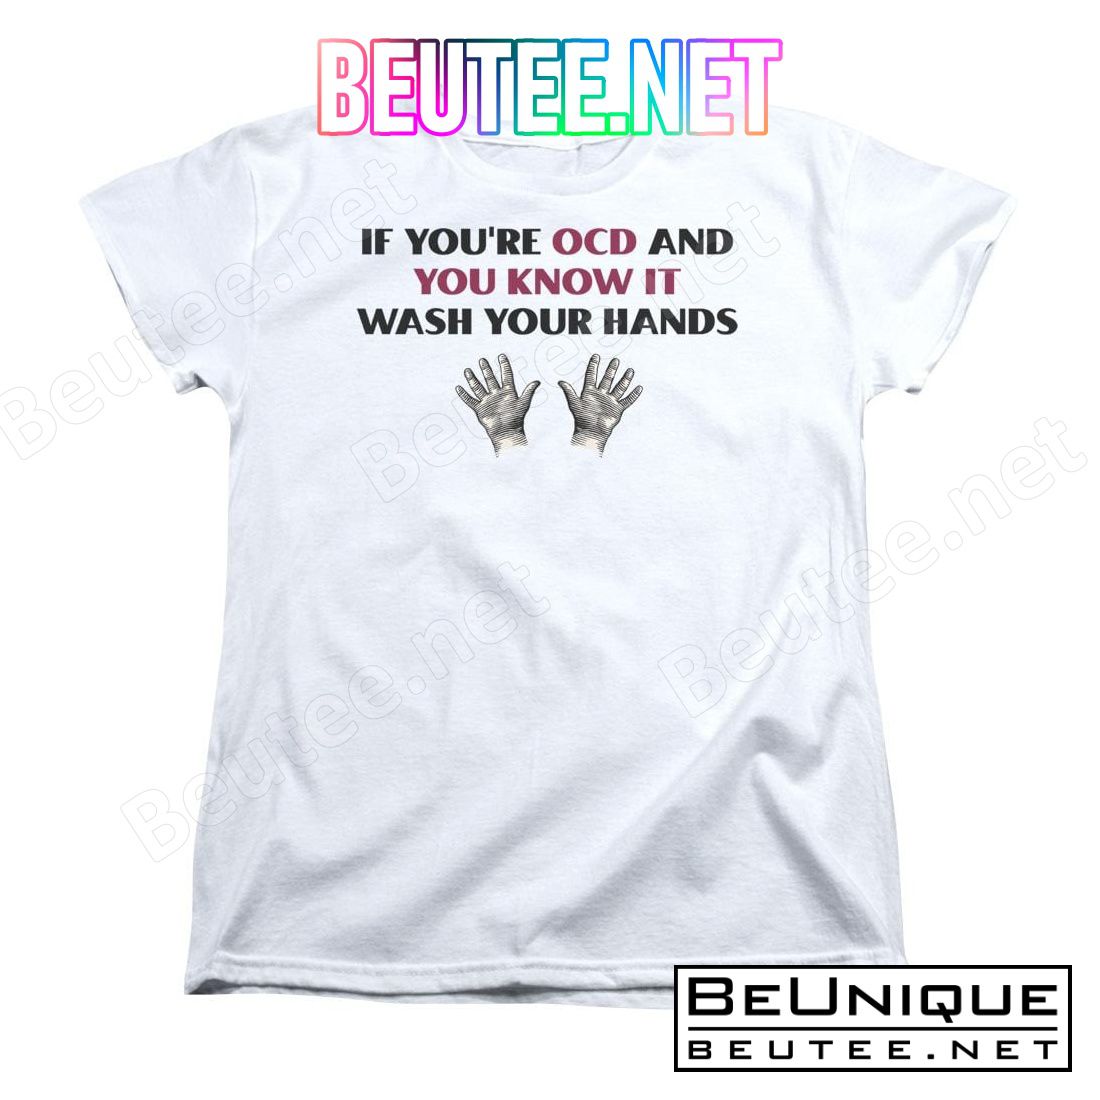 If You're OCD And You Know It Wash Your Hands Shirt